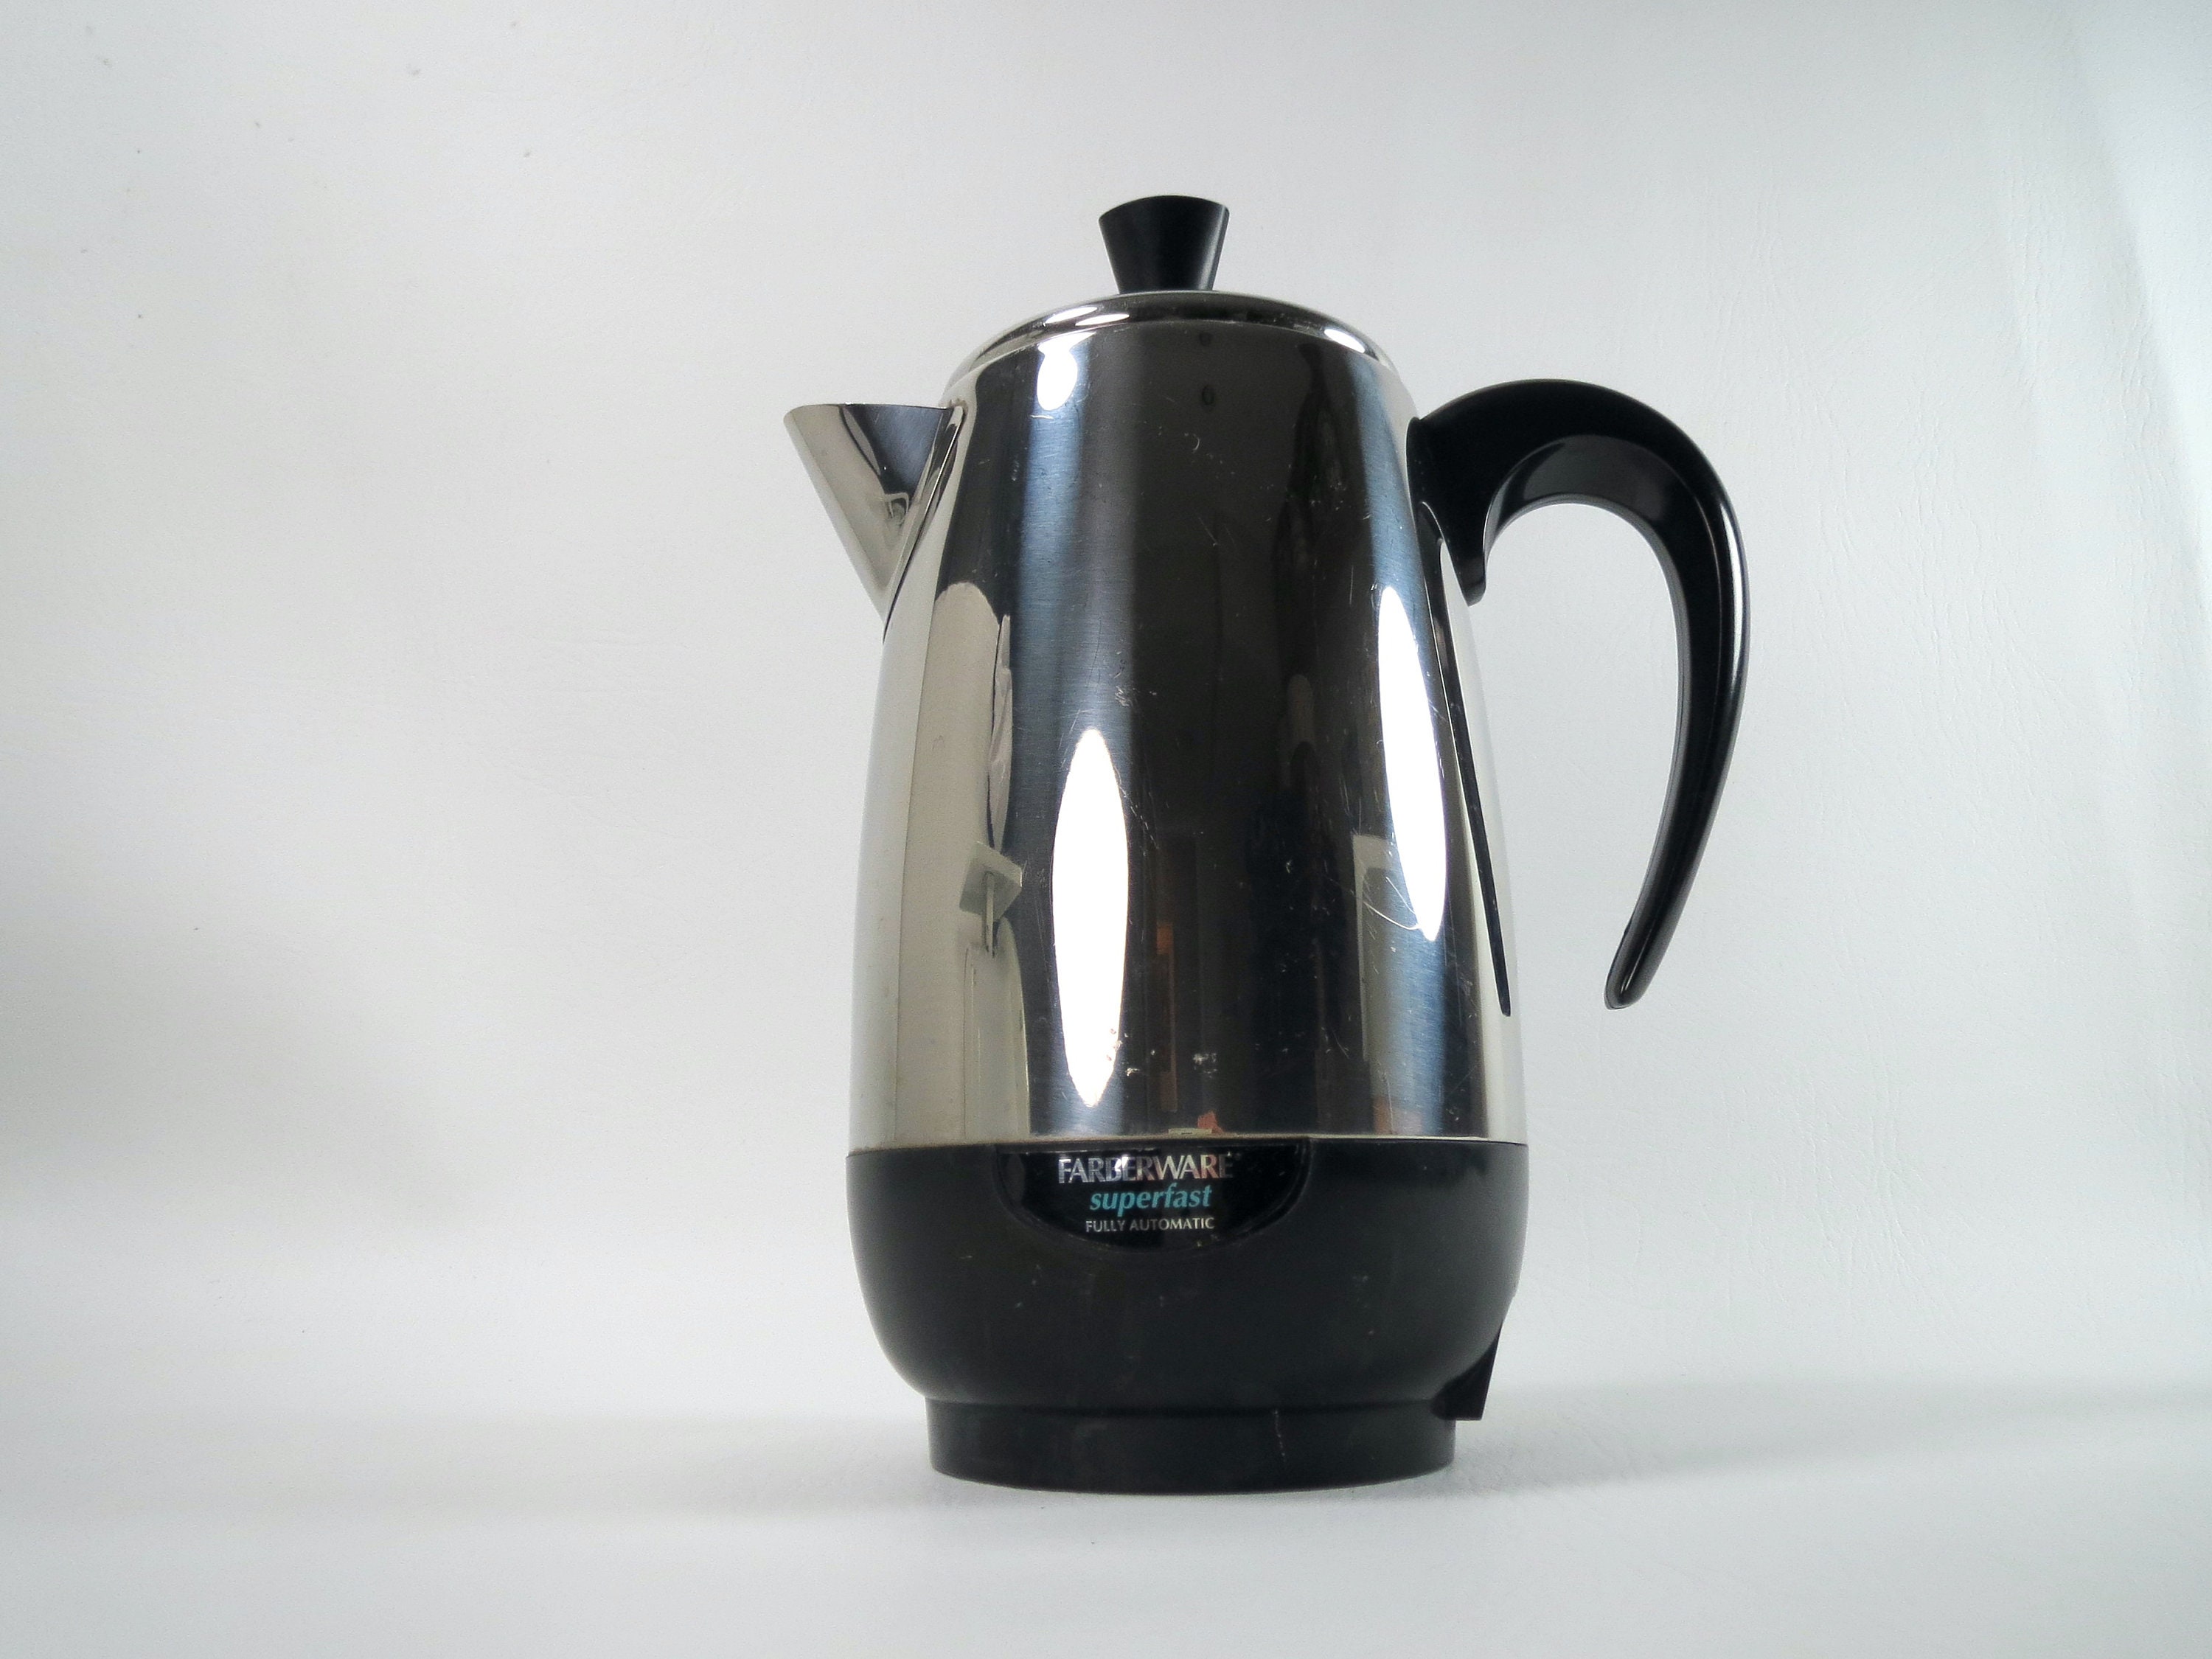 Electric Percolator 8 Cup Farberware Superfast Stainless Steel